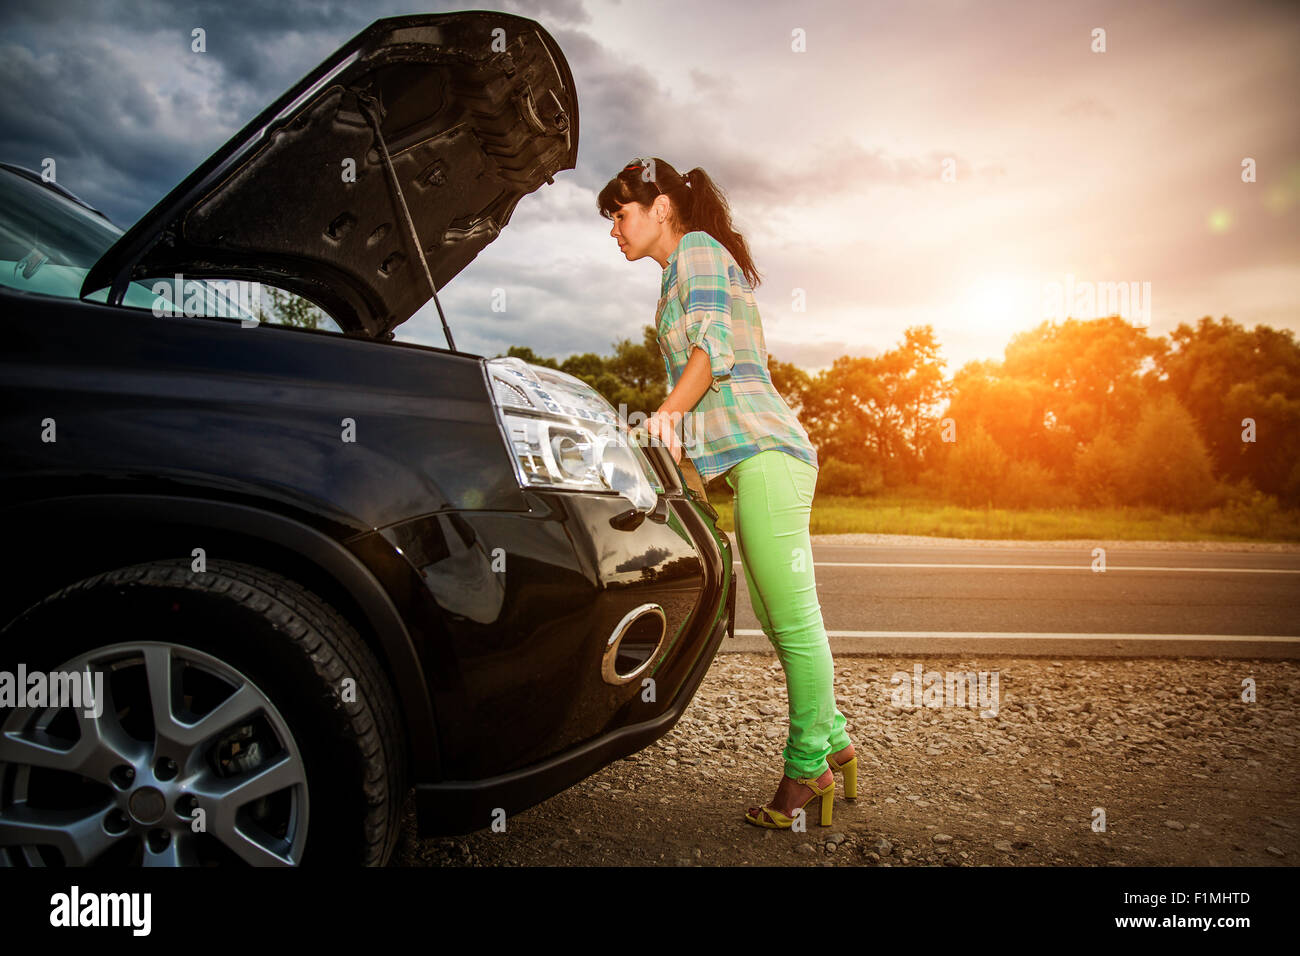 Woman on the road near the car. Damage to vehicle problems on the road. Stock Photo